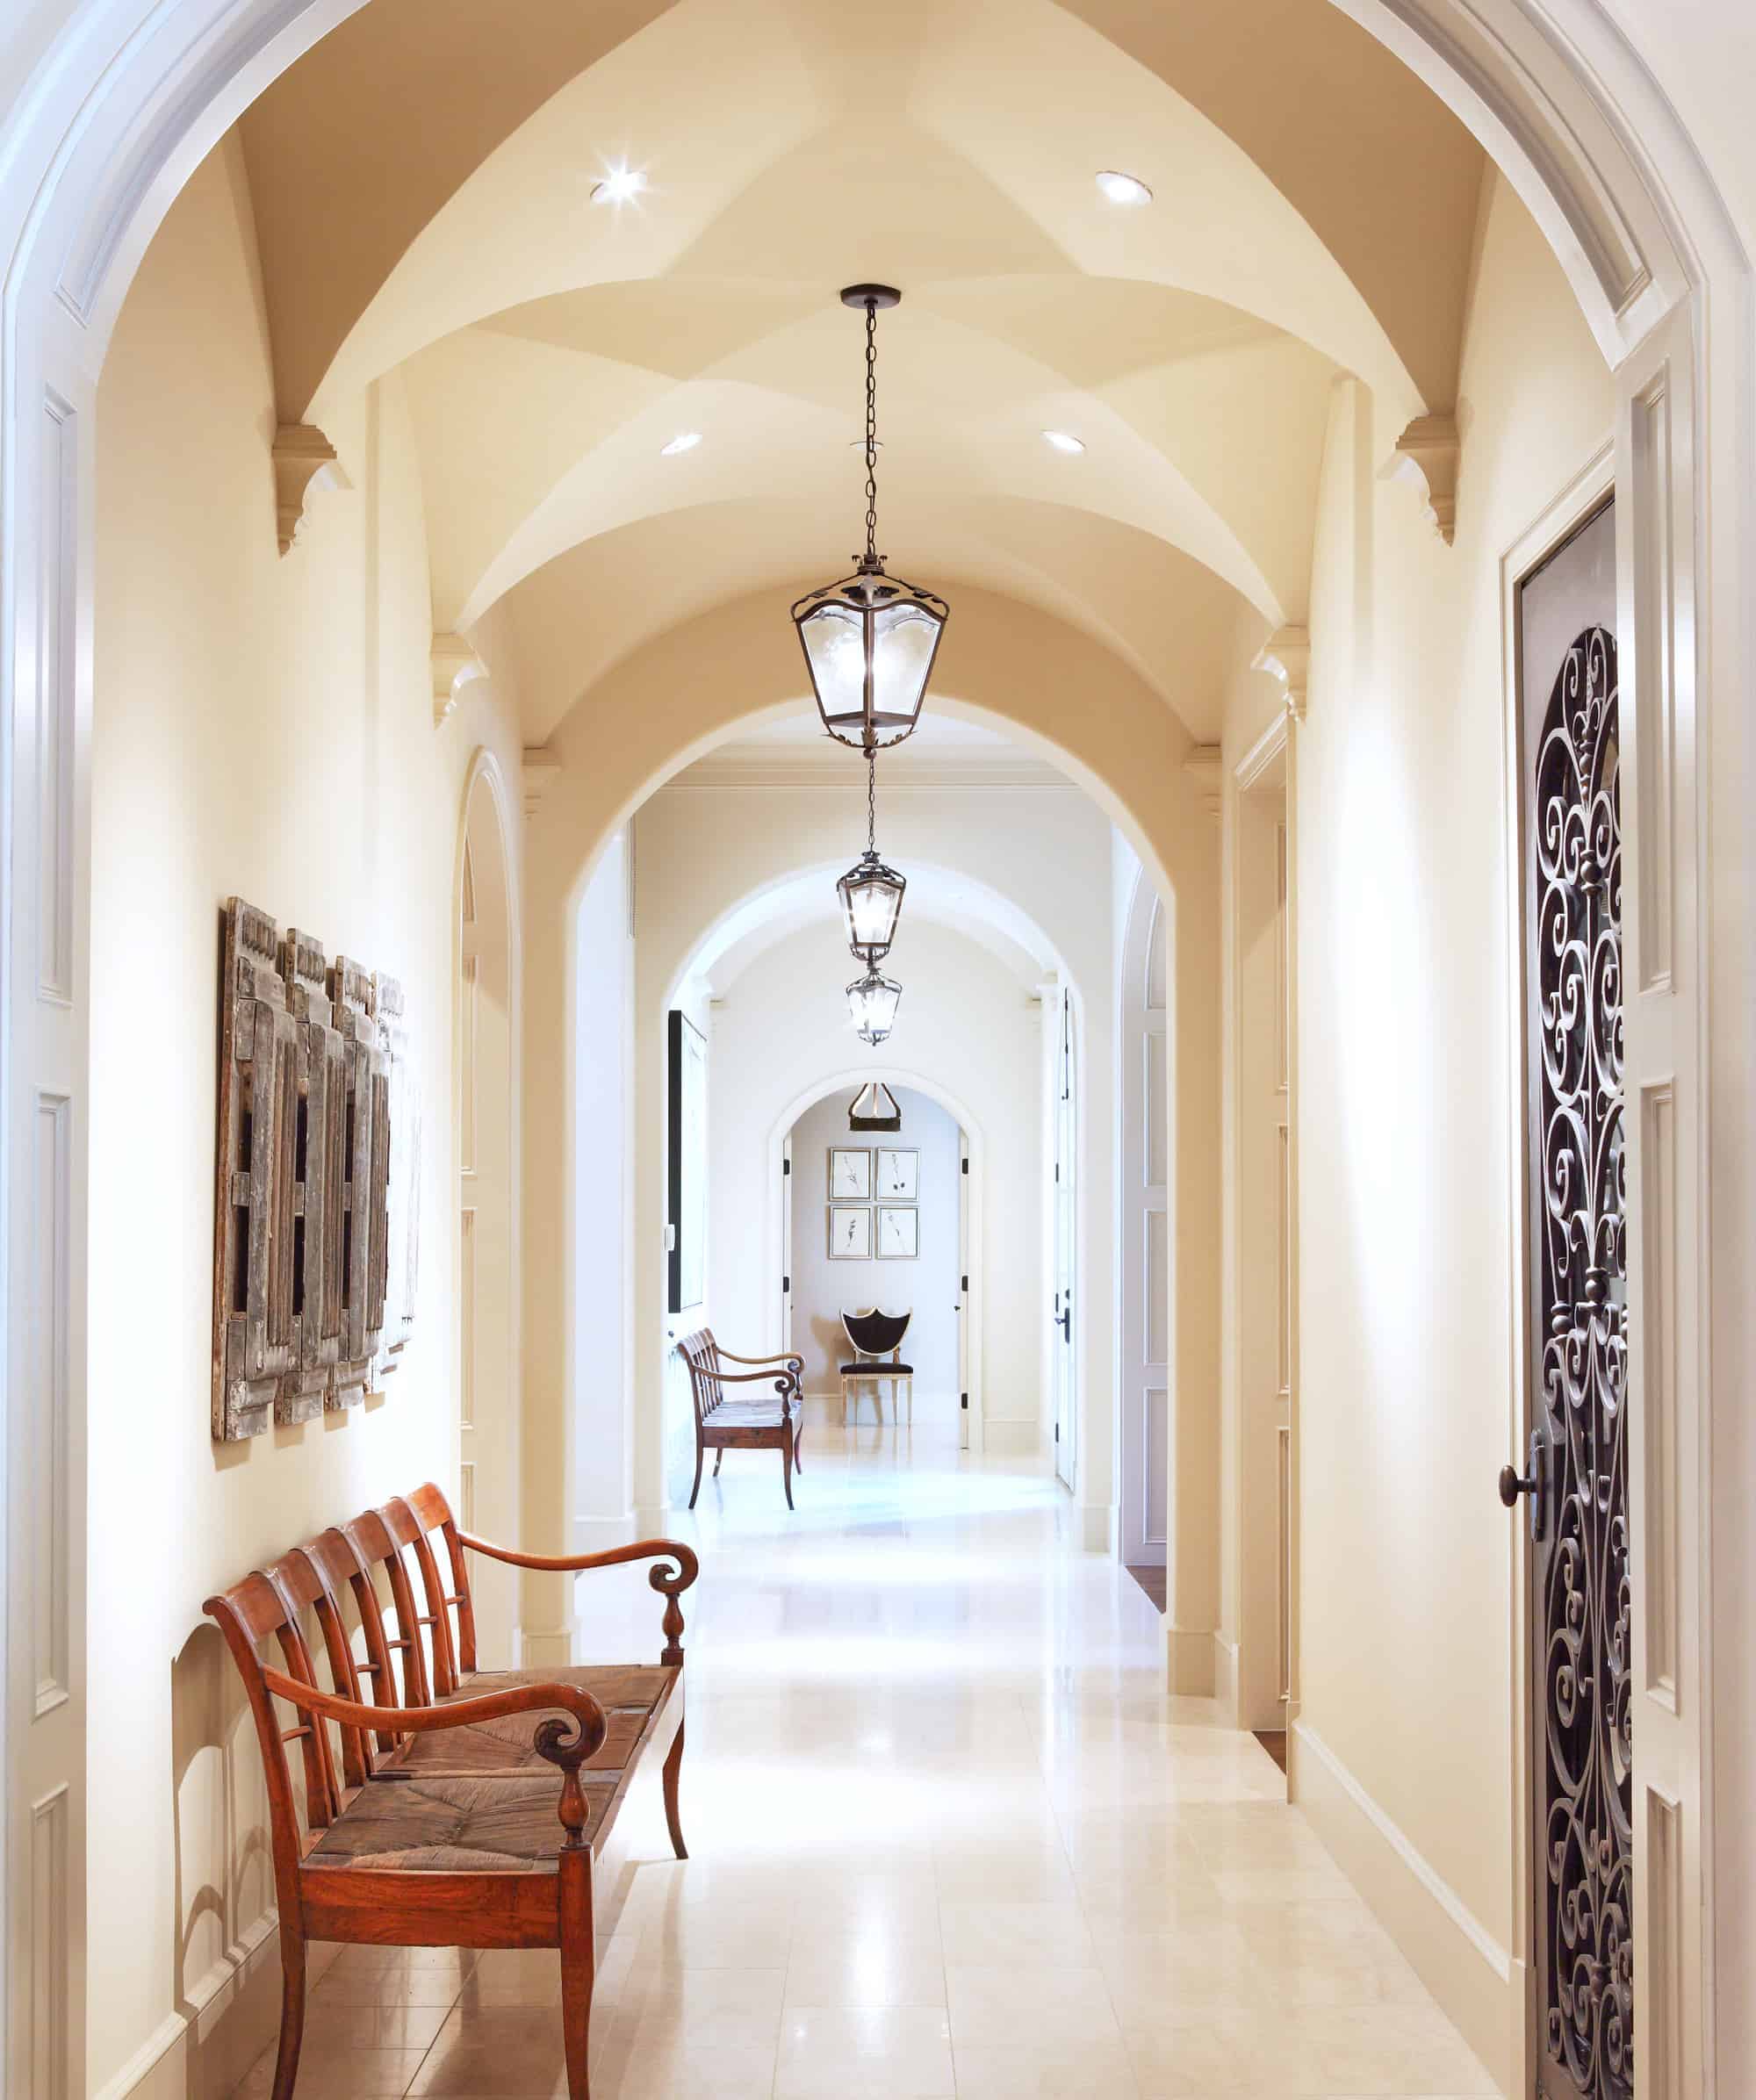 A long hallway with tall ceilings and decorations